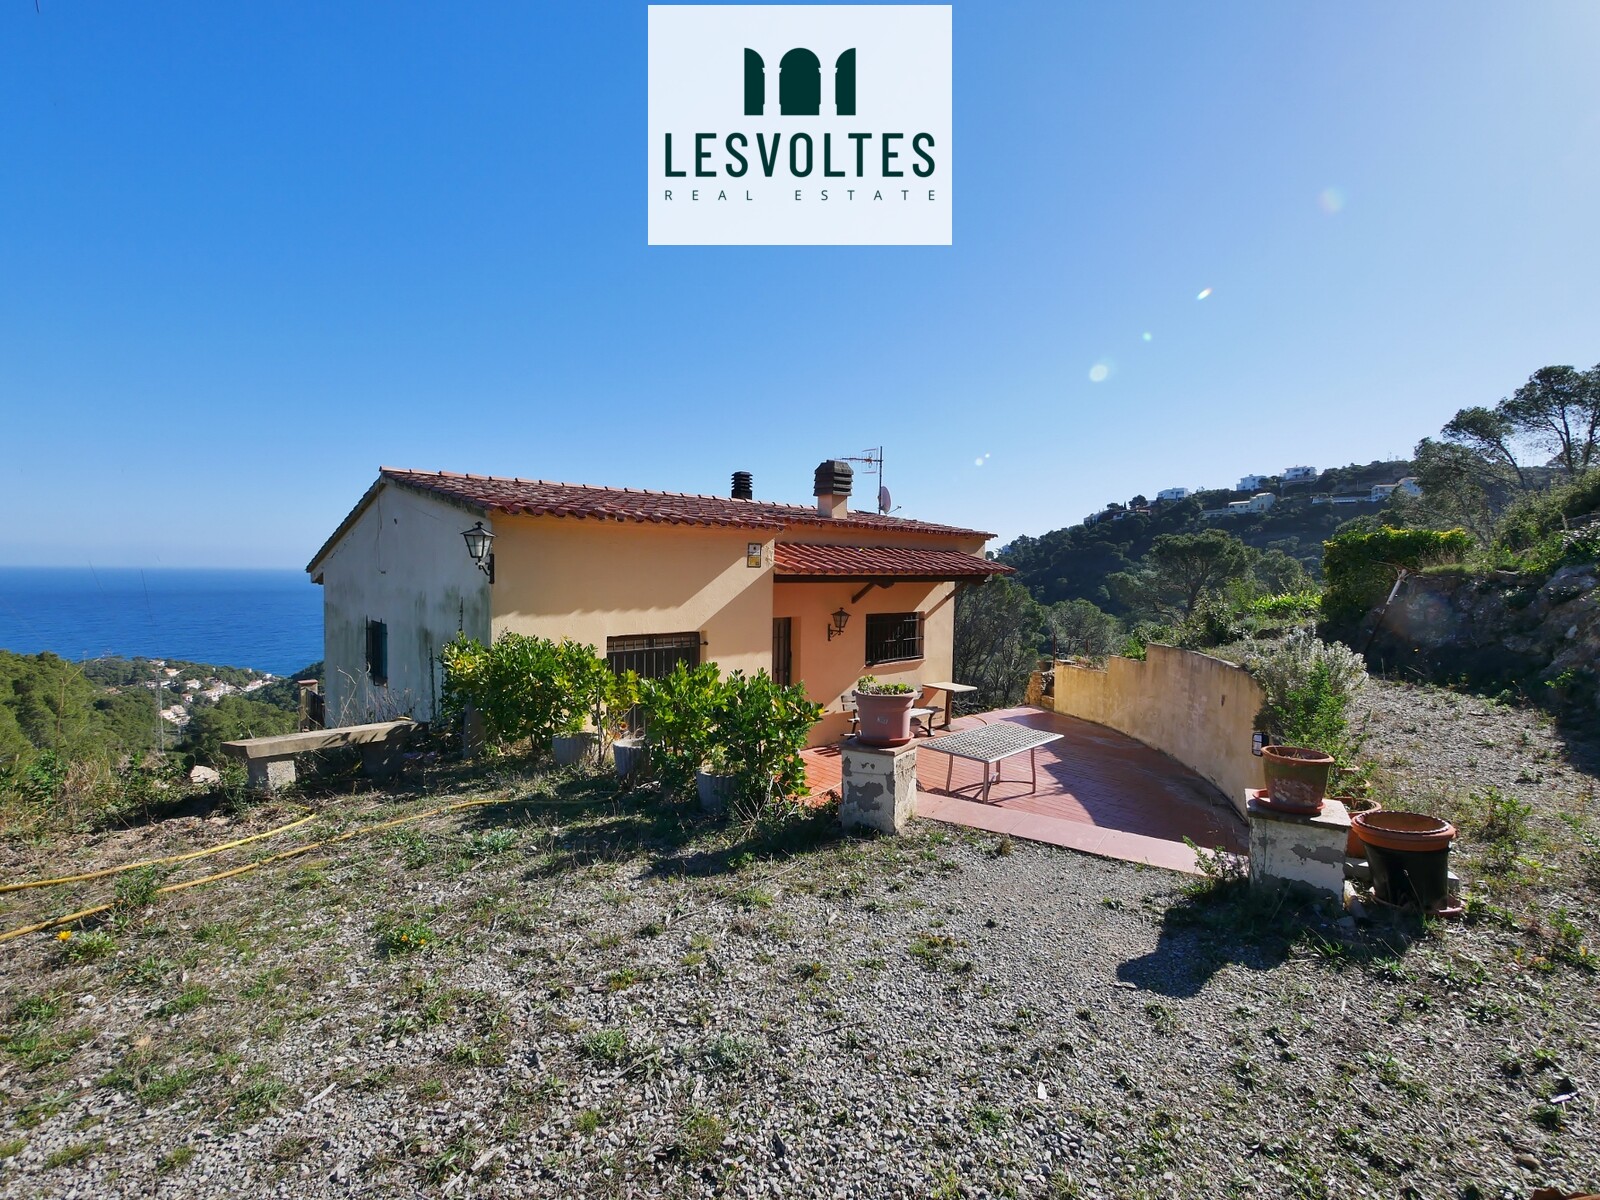 HOUSE IN BEGUR WITH SEA VIEWS AND A PLOT OF 7.500 M2 IN THE MIDDLE OF THE NATURE